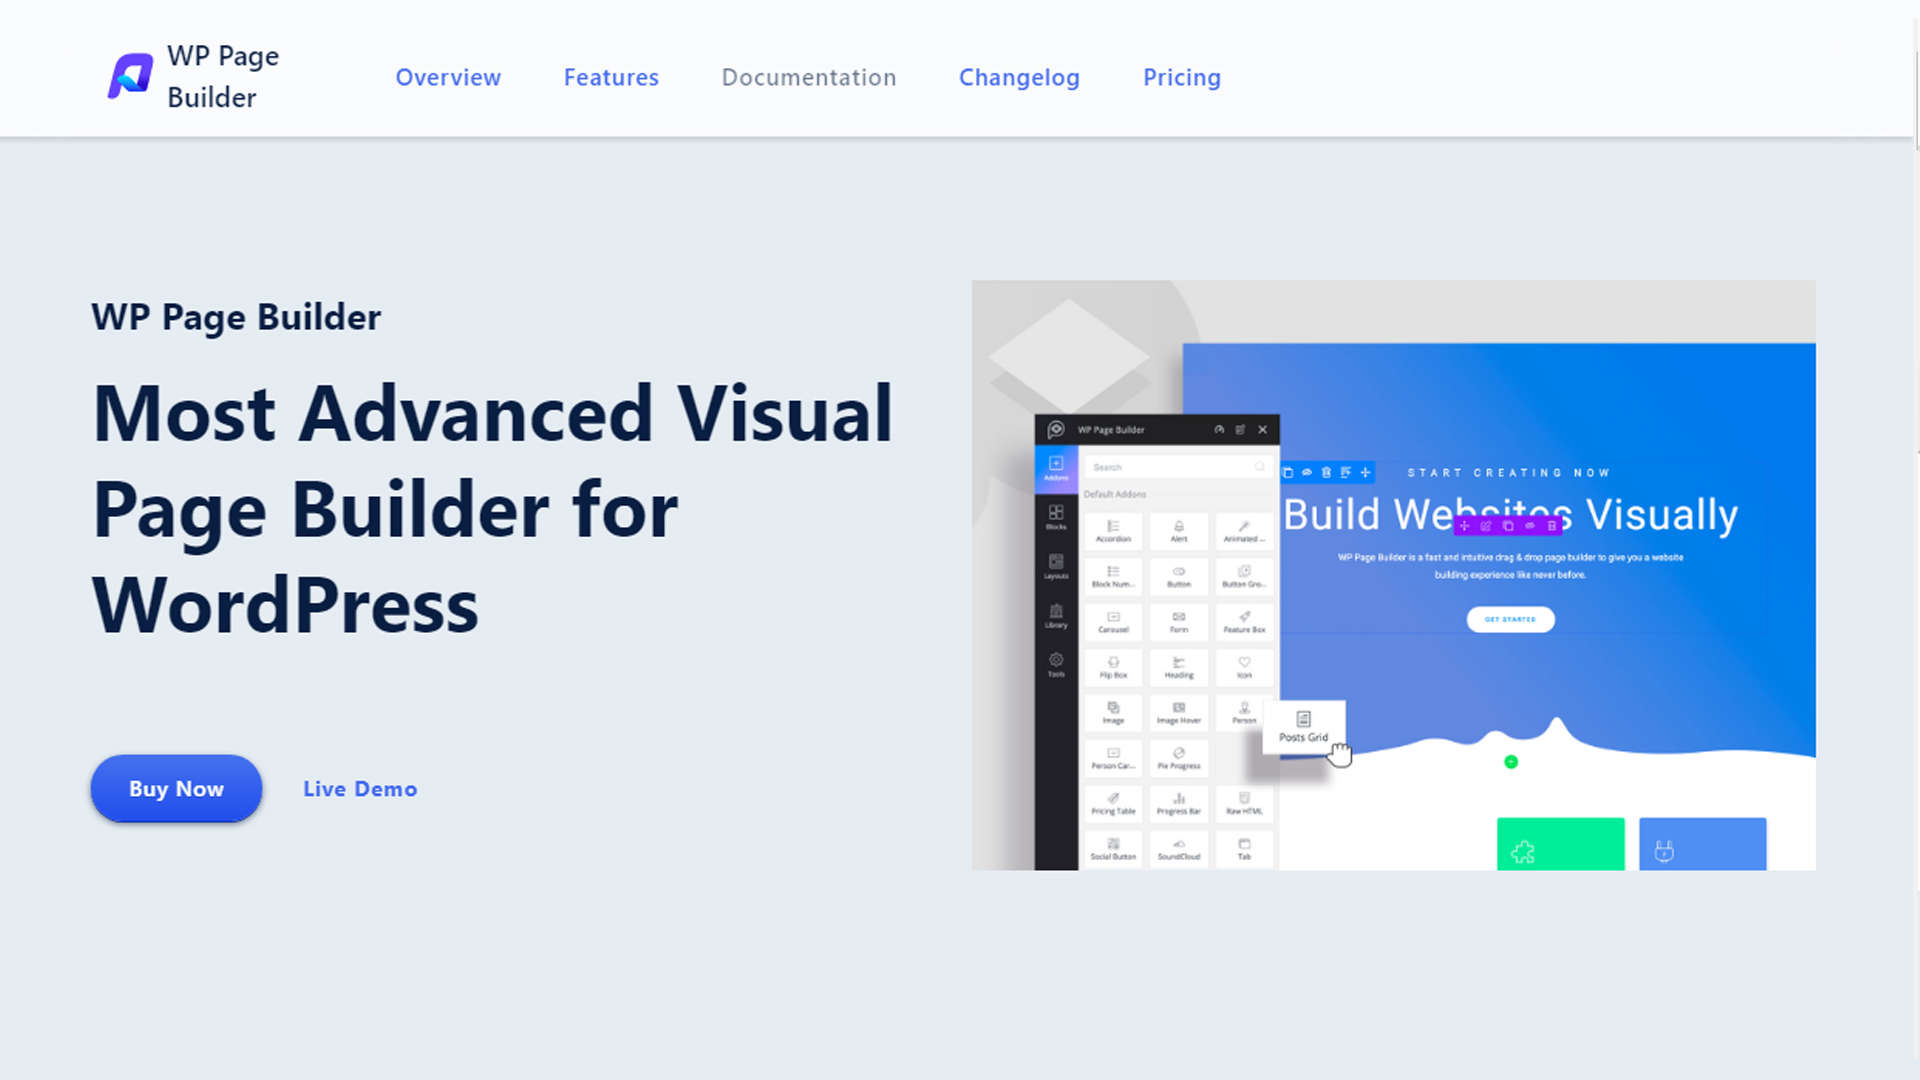 WP Page Builder Plugin